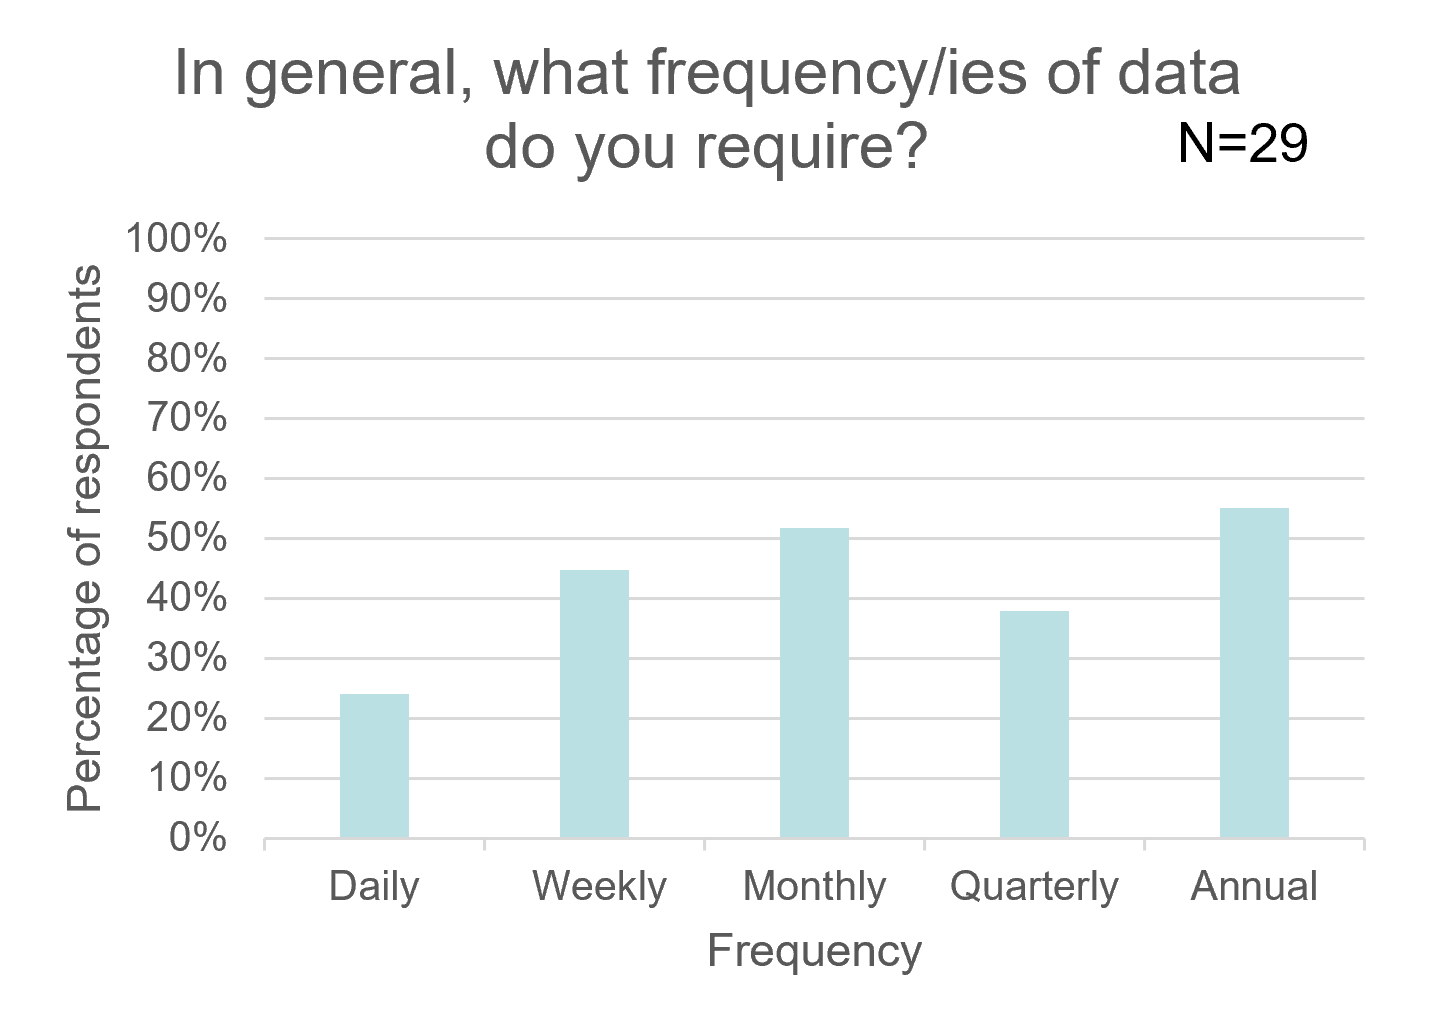 This chart shows the frequencies of data that respondents needed. This is broken down by: Daily, Weekly, Monthly, Quarterly and Annual.